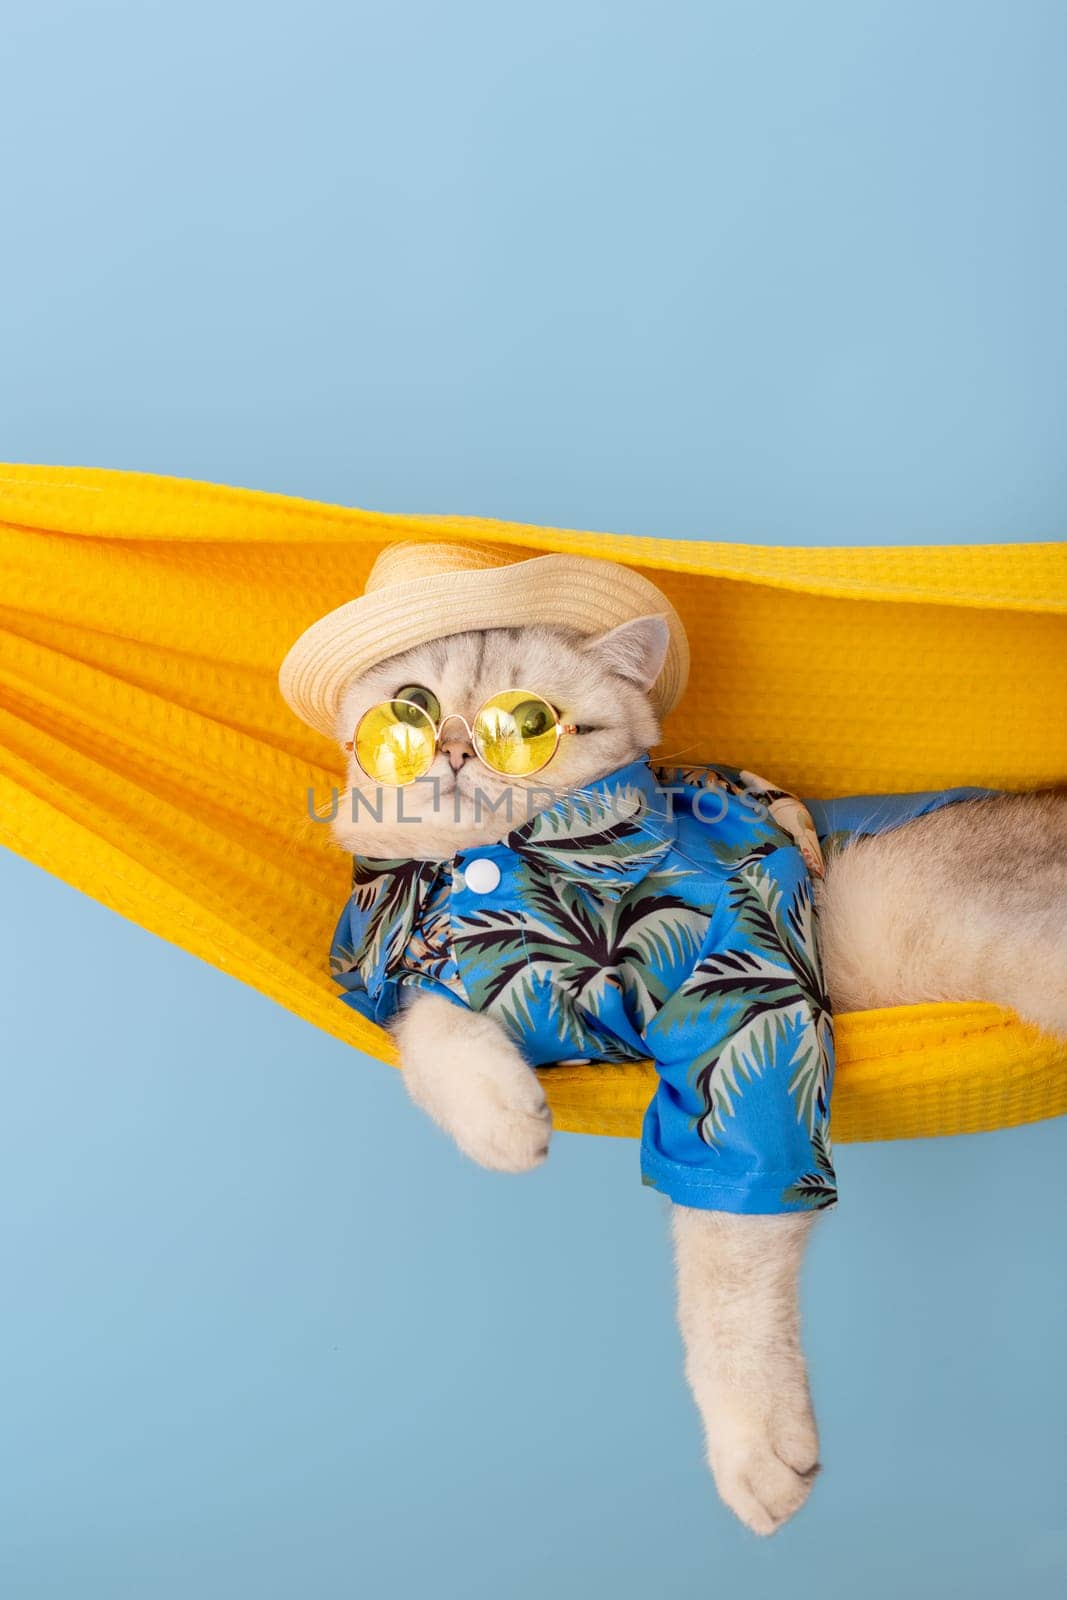 Adorable white cat in a straw hat, yellow glasses and blue shirt, resting in a yellow fabric hammock, on a blue background.Vertical. Close up. Copy space